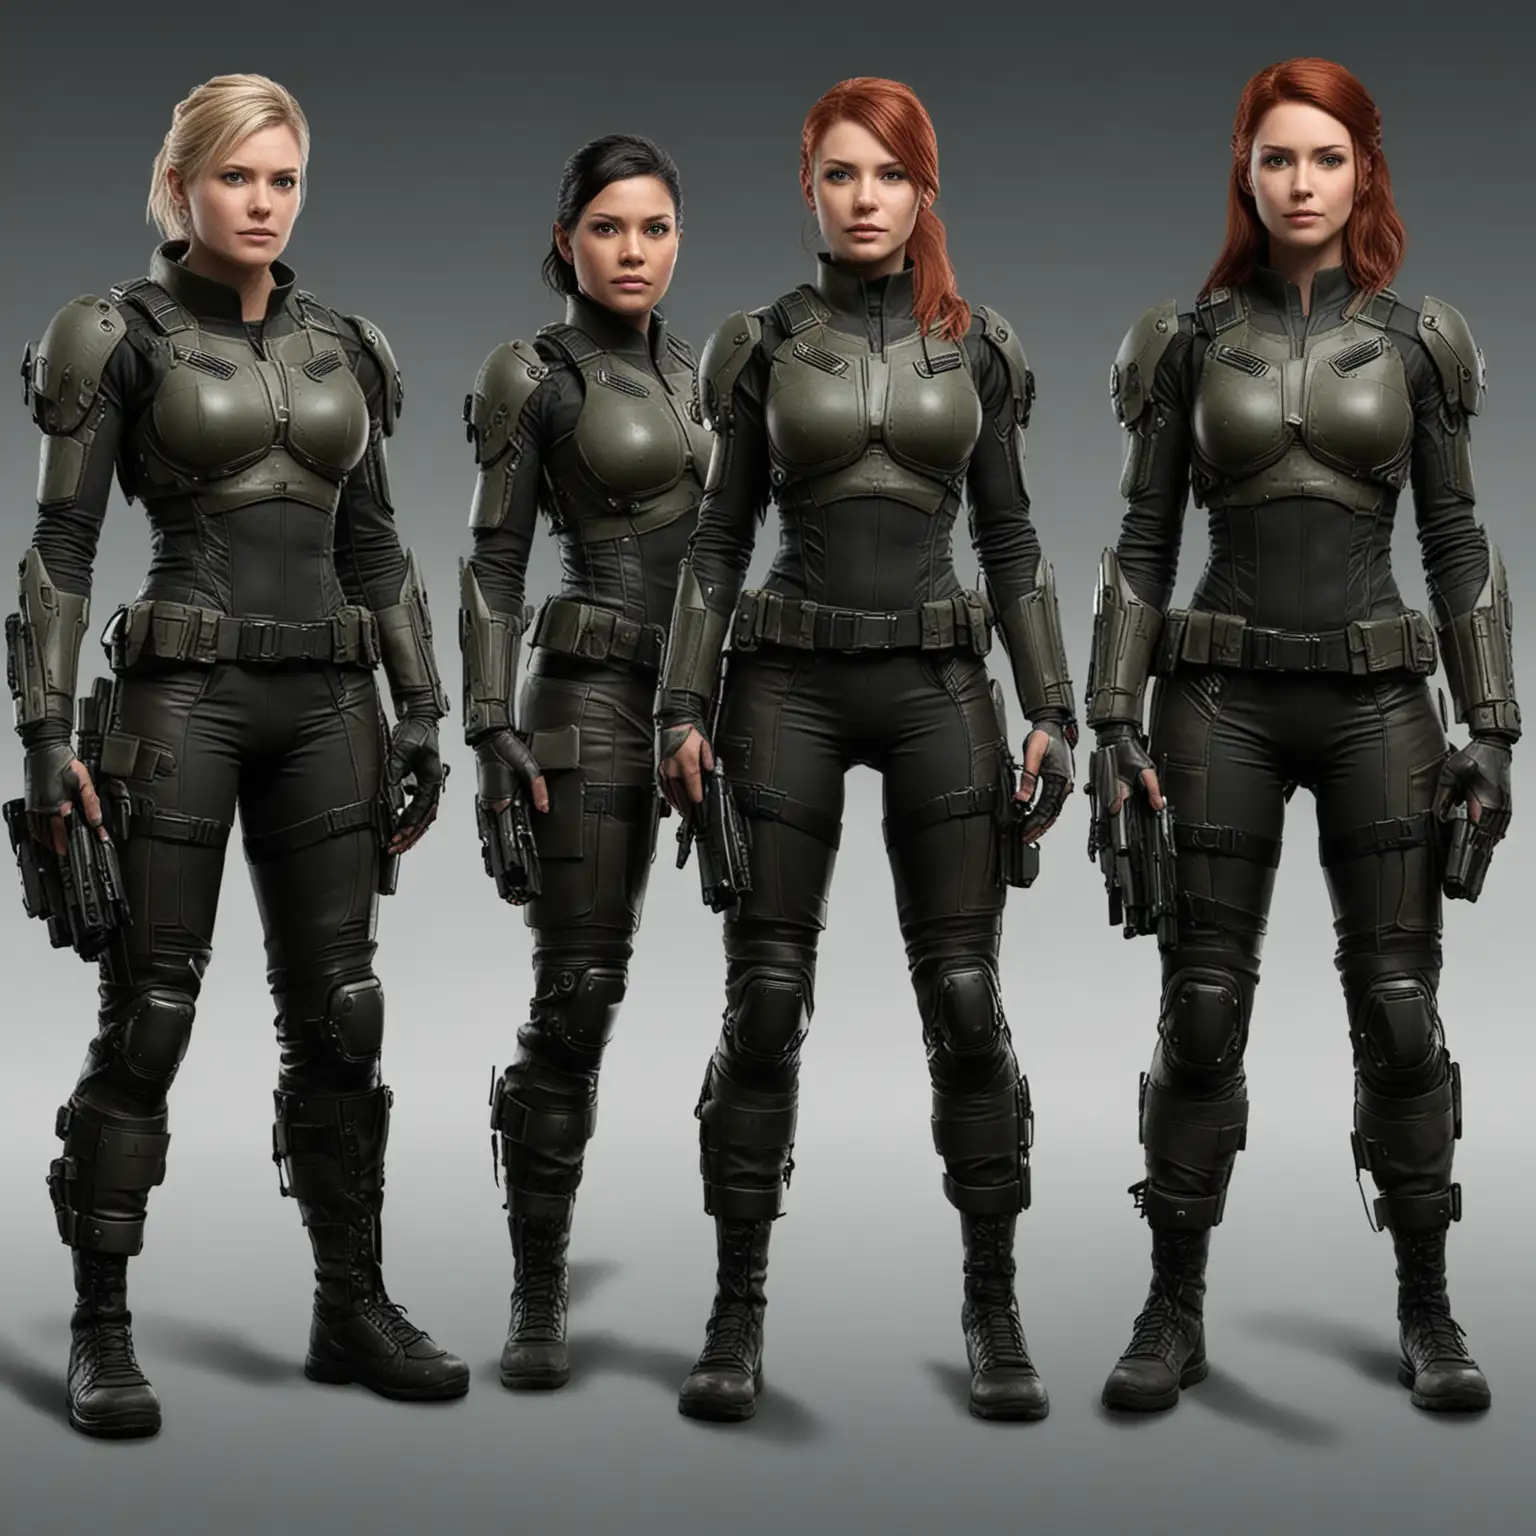 generate an image of a syfy tactical future team